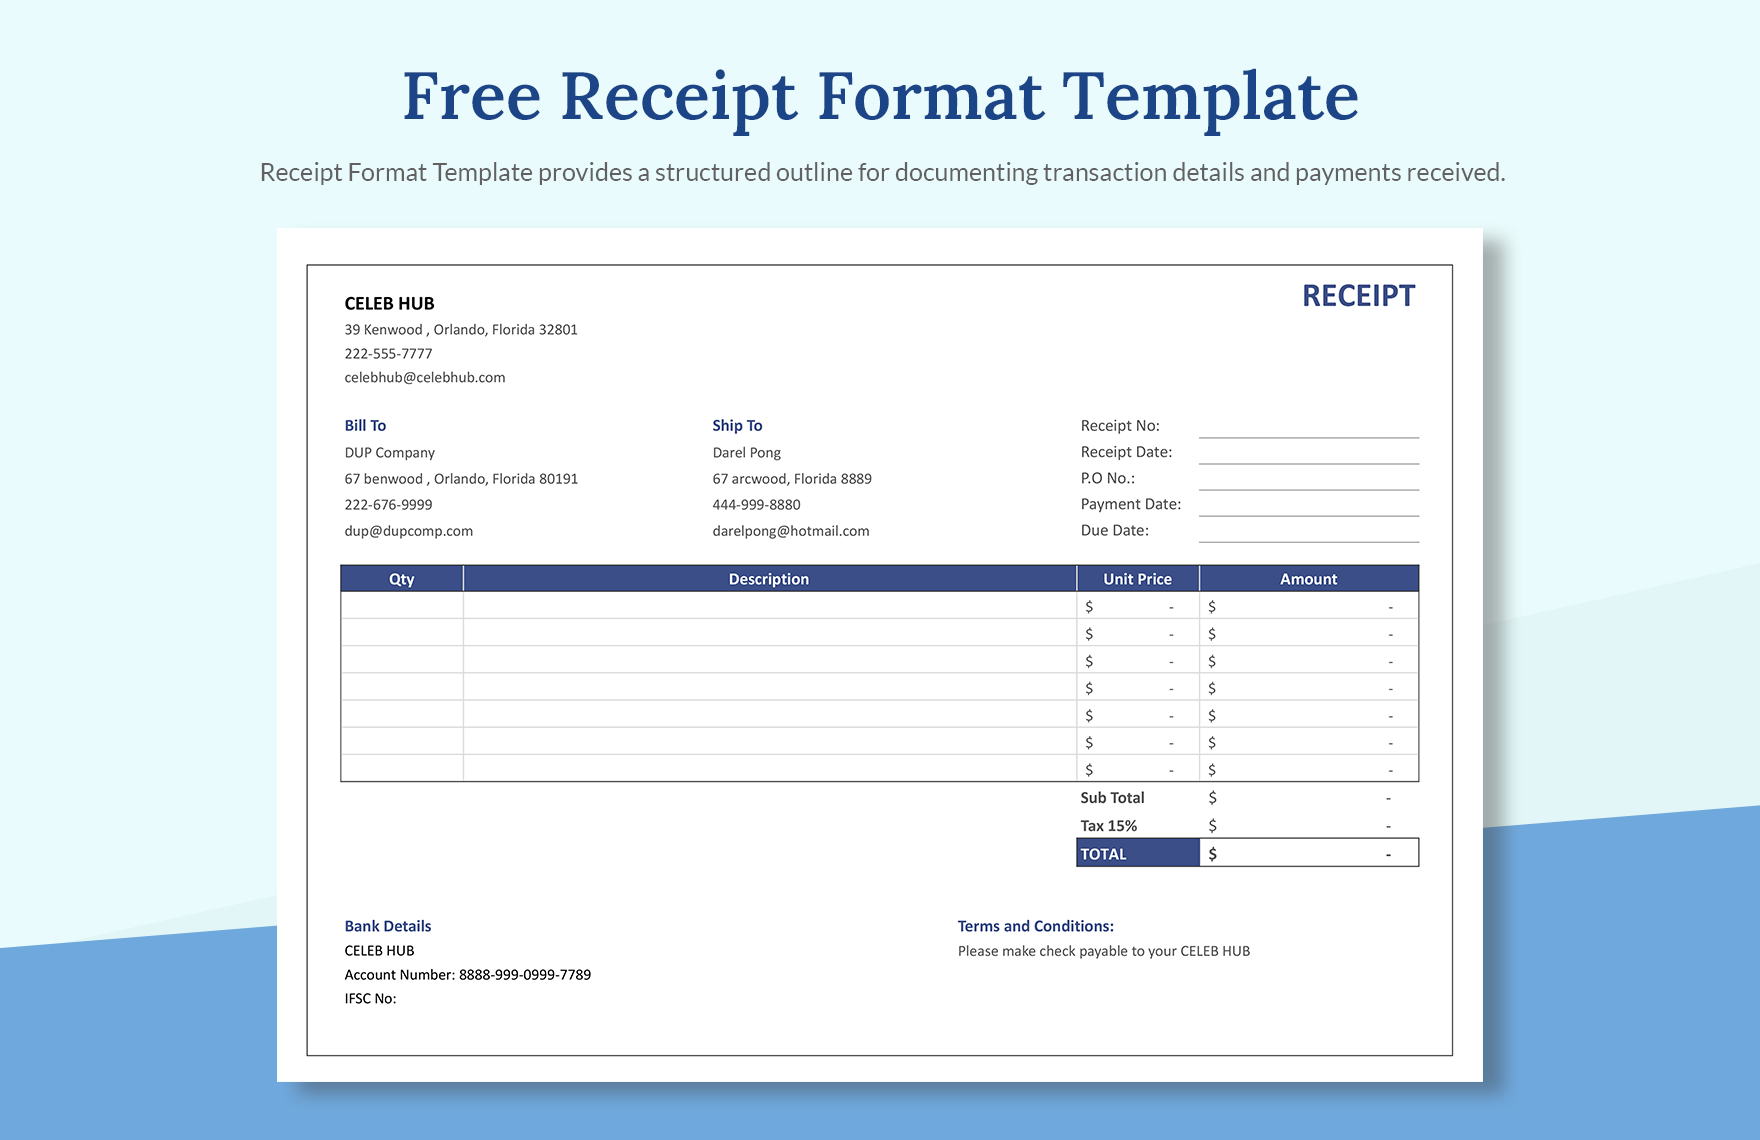 free-receipt-format-template-download-in-word-google-docs-excel-google-sheets-apple-pages